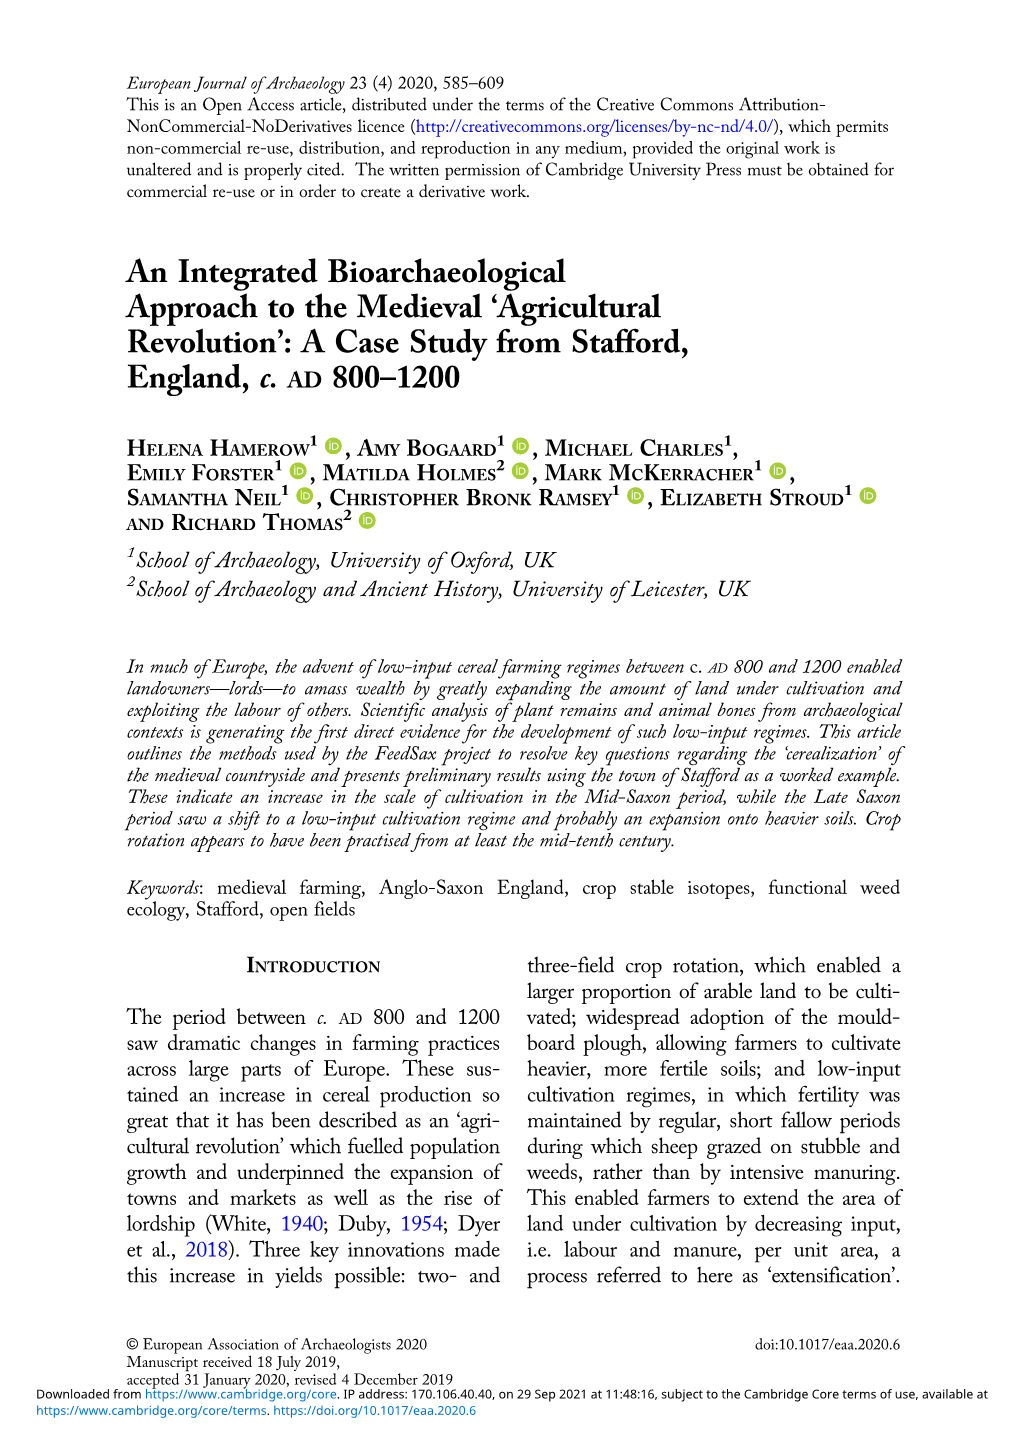 An Integrated Bioarchaeological Approach to the Medieval 'Agricultural Revolution': a Case Study from Stafford, England, C